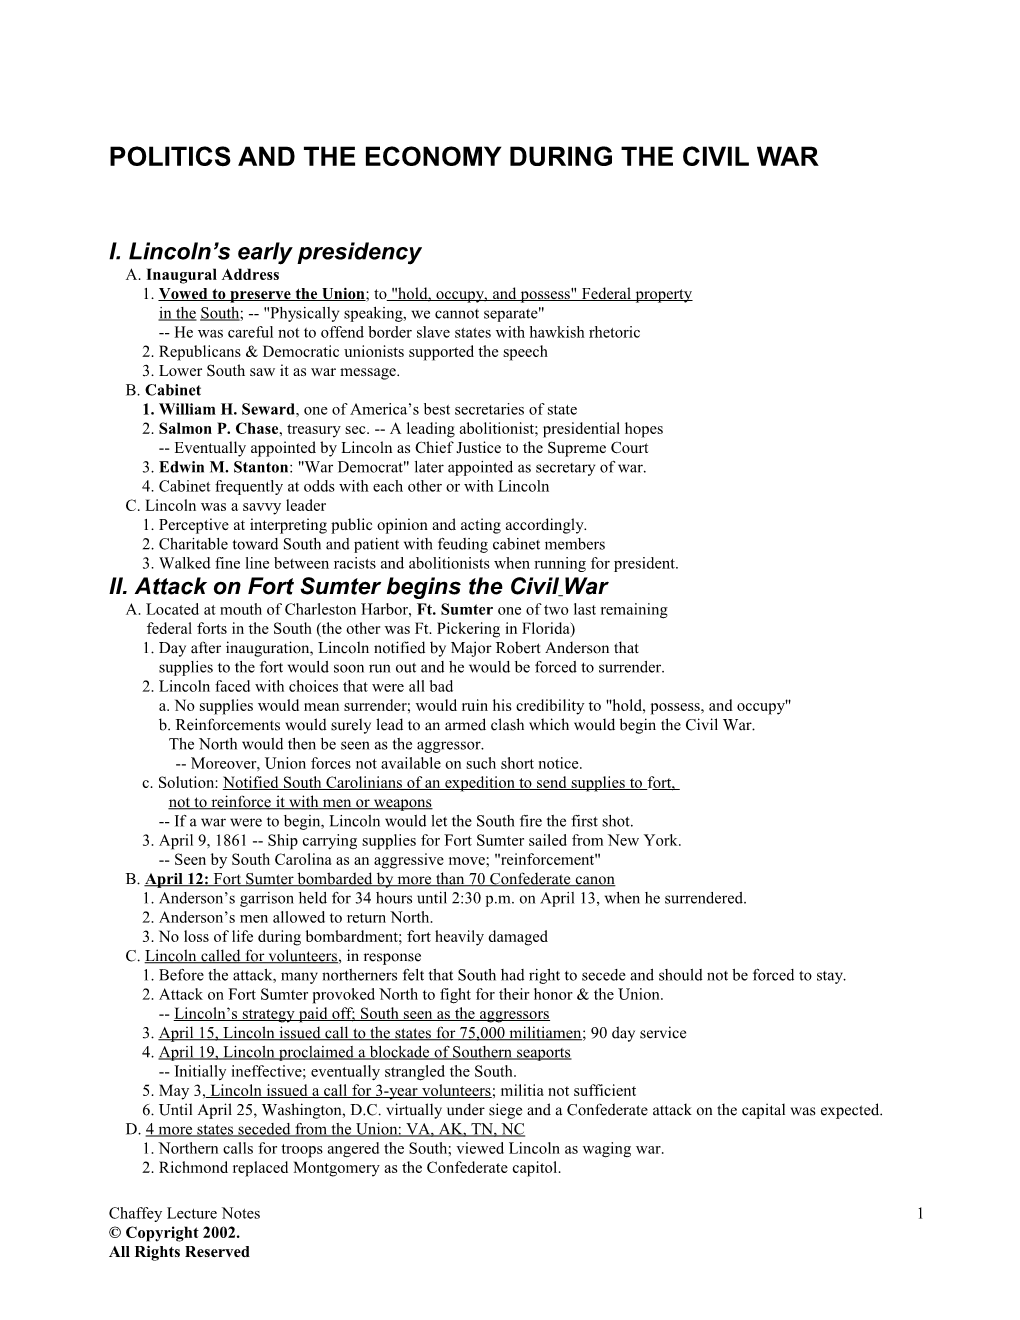 Politics and the Economy During the Civil War